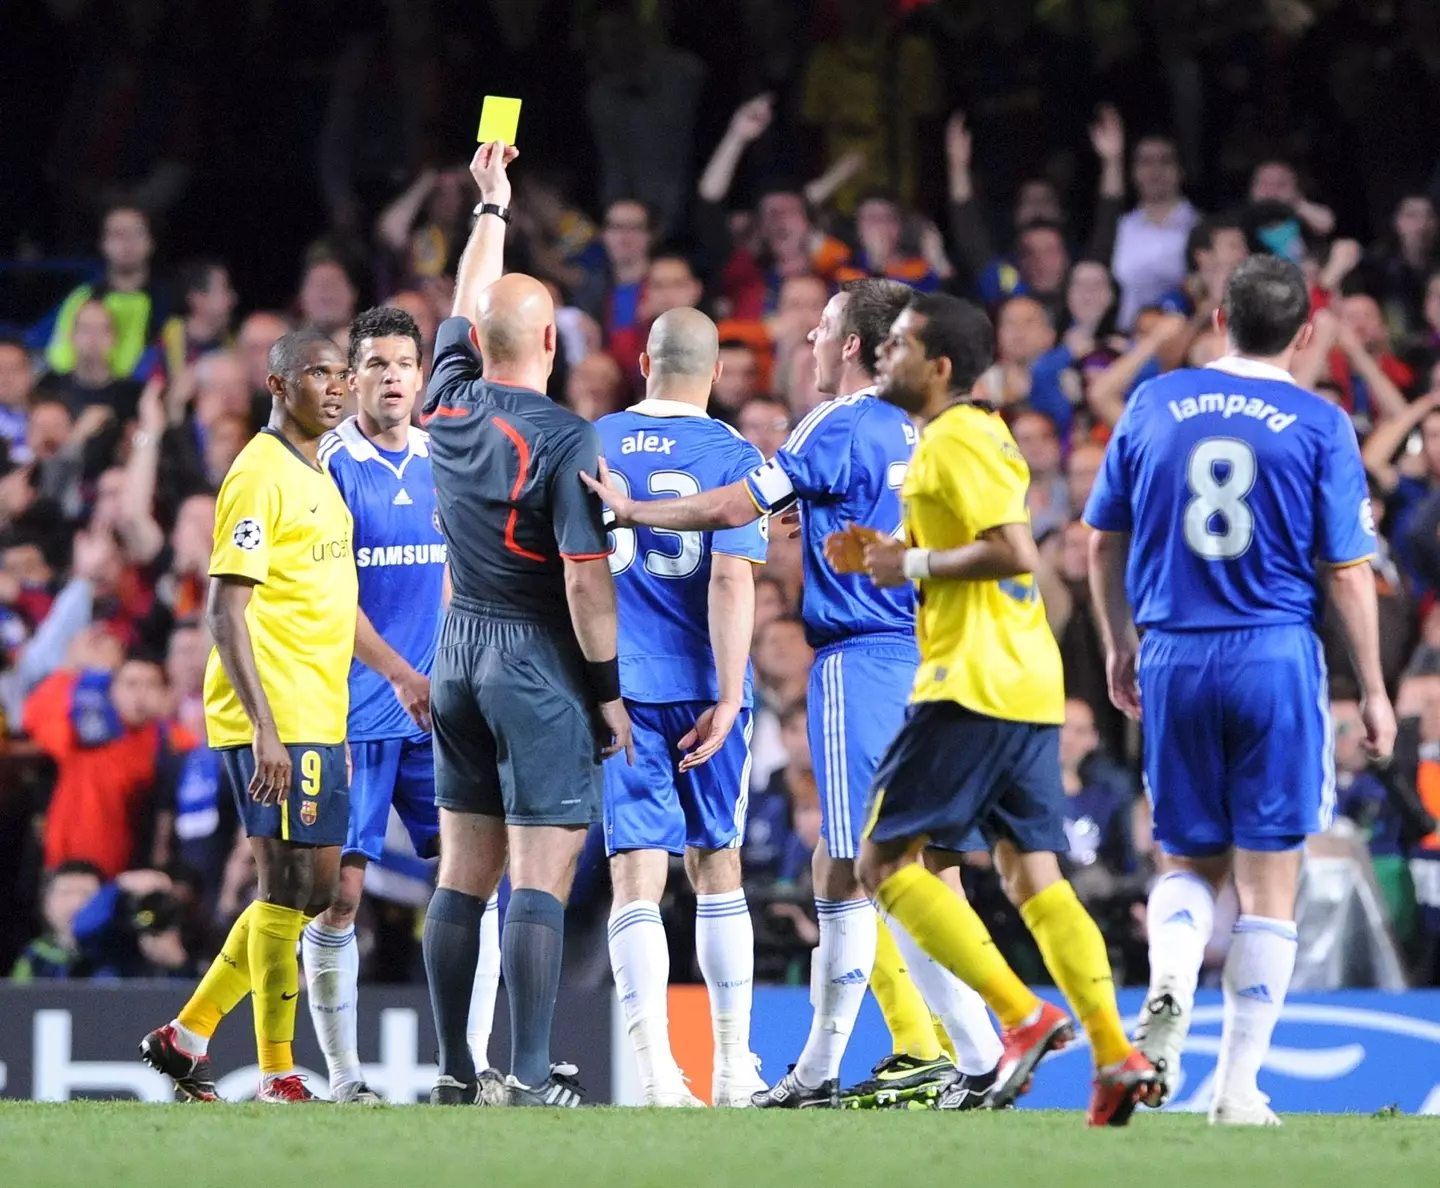 Chelsea thought they should have had several penalties.